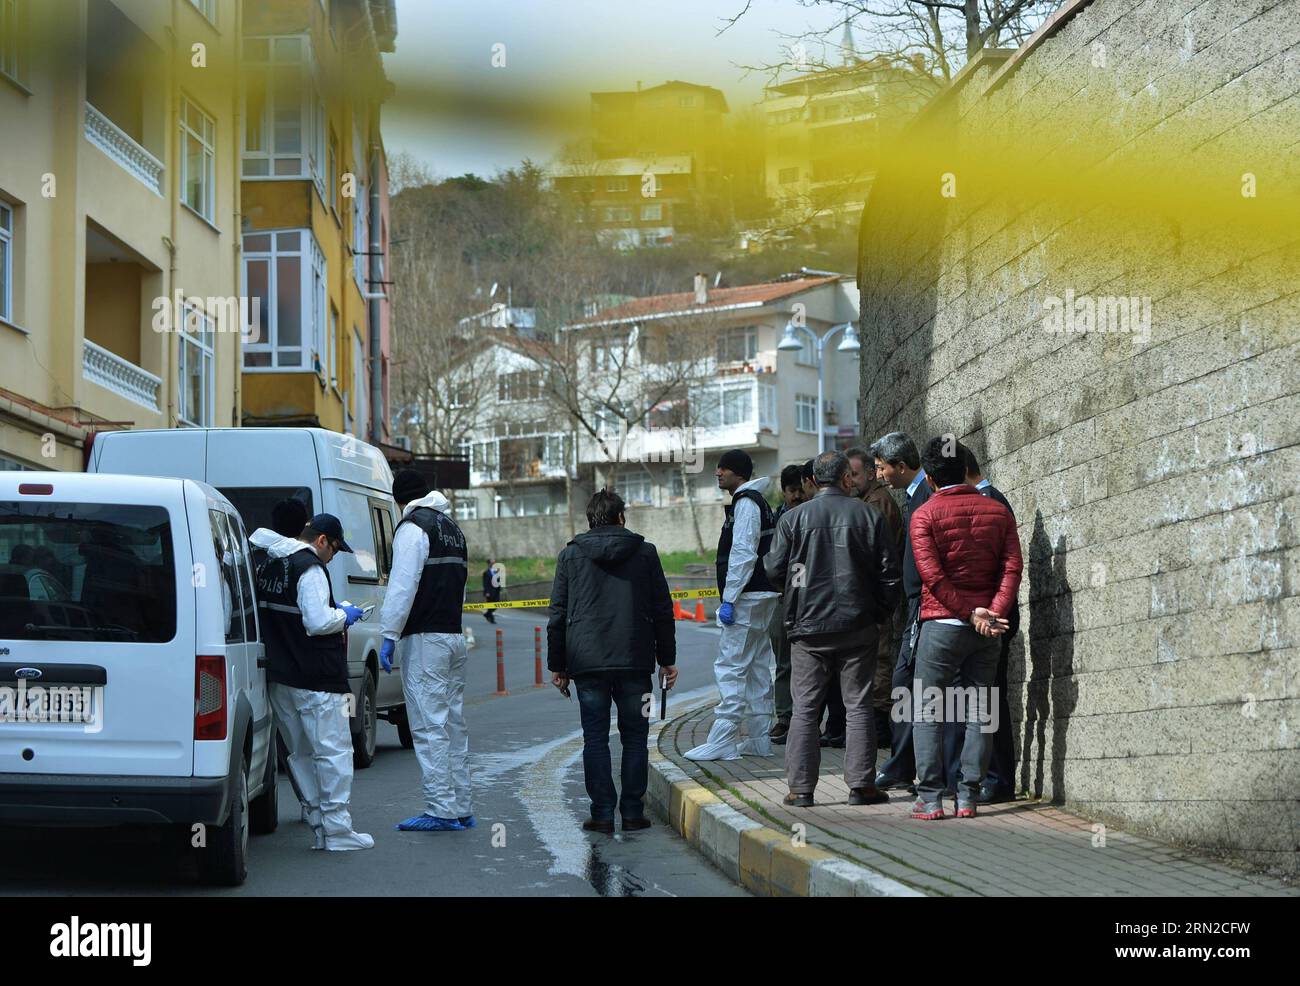 (150227) -- ISTANBUL, Feb. 27, 2015 -- Turkish police closed a street outside the U.S. consulate general in Istanbul on Feb. 27, 2015. Turkish police detained a man threating to detonate a suicide bomb in front of the U.S. consulate in Istanbul on Friday, local media said. The suspect, reportedly mentally unstable, said he was going to blow himself up, while the special operation teams neutralized him soon. Istanbul has been on high security alert since January, after a suicide bomber blew herself up at a police station in the historic Sultanahmet neighborhood, killing one officer and wounding Stock Photo